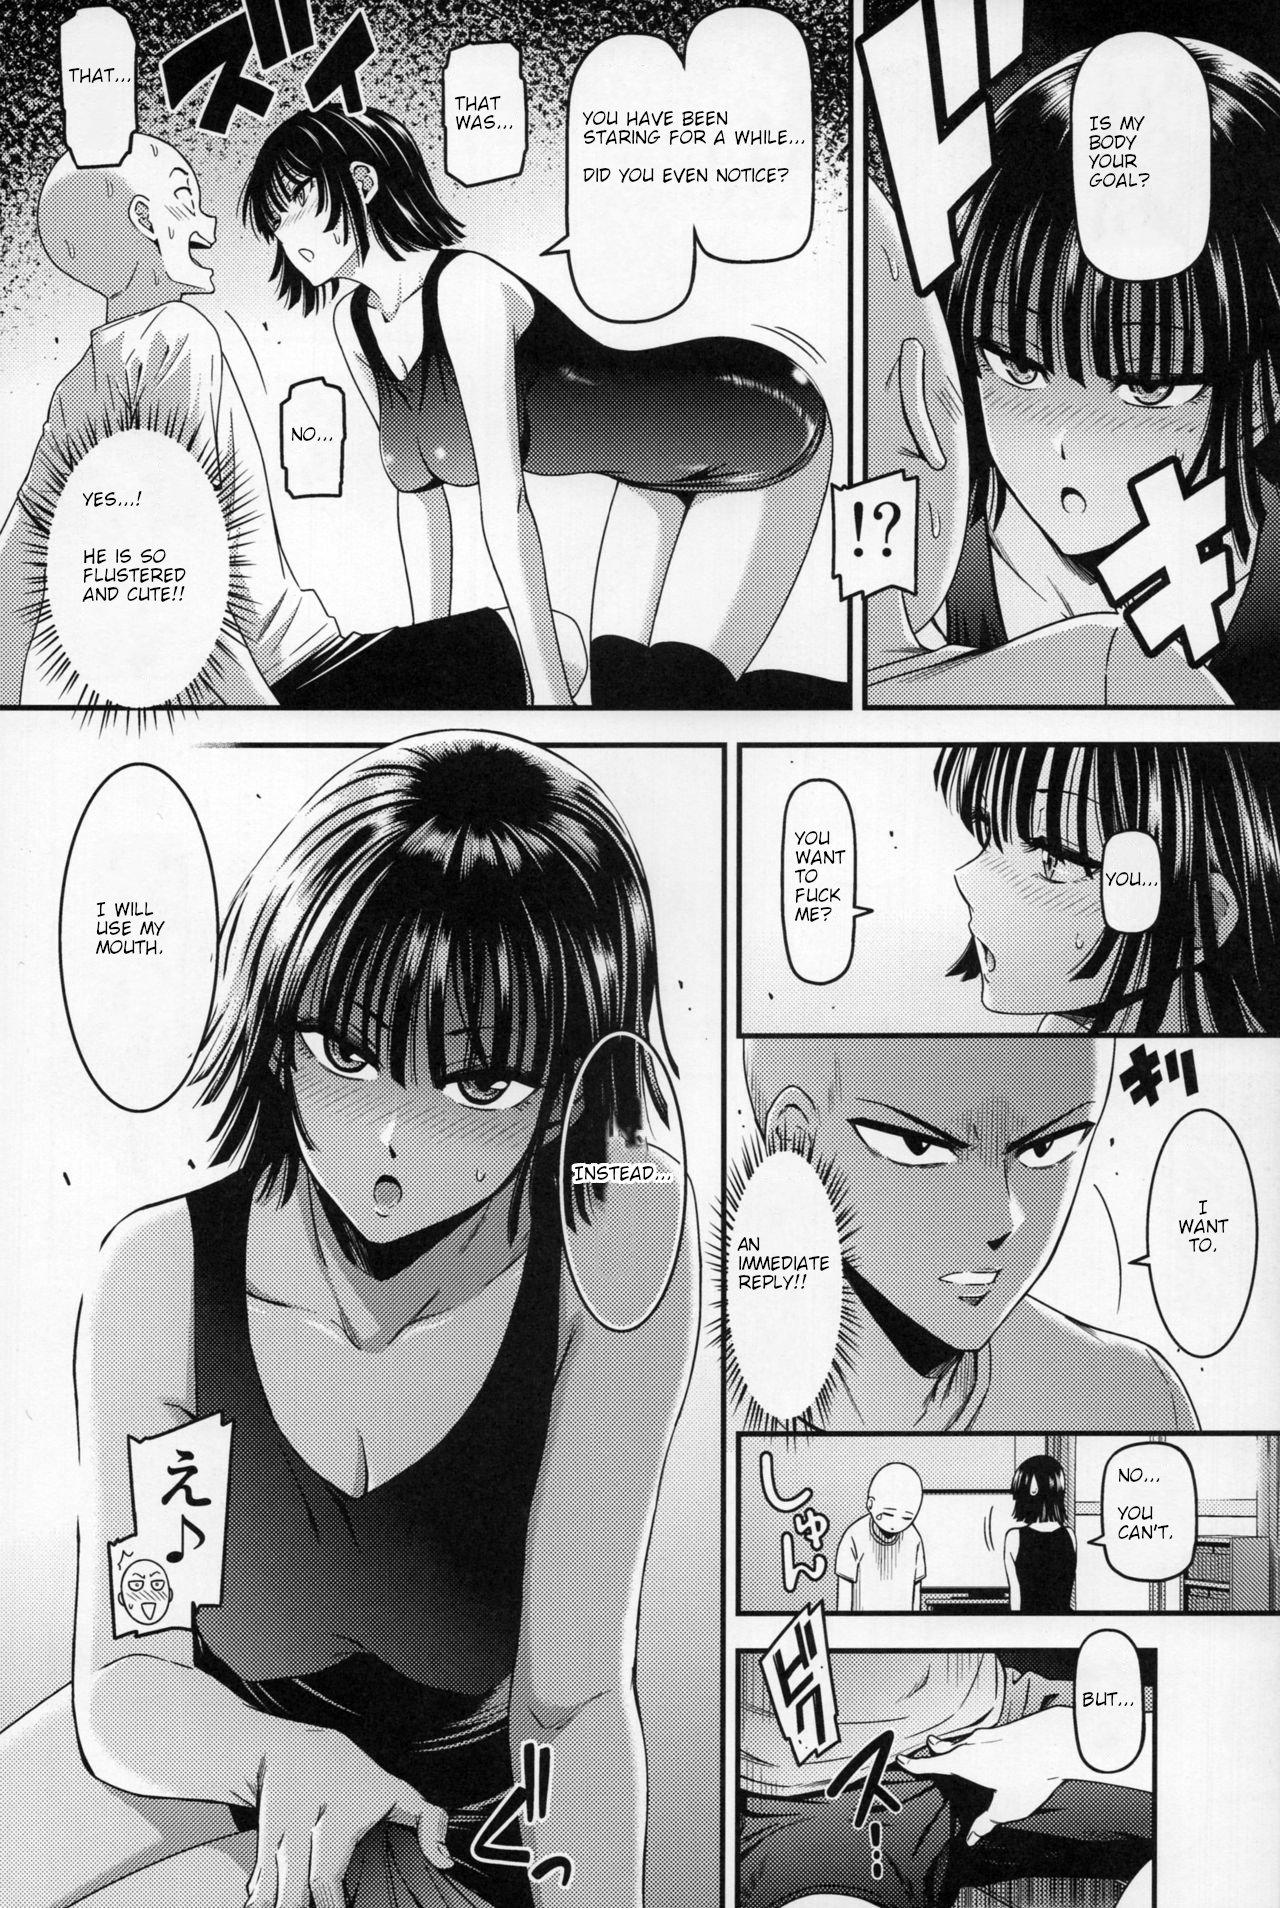 Pigtails ONE-HURRICANE 6 - One punch man Stepbro - Page 9